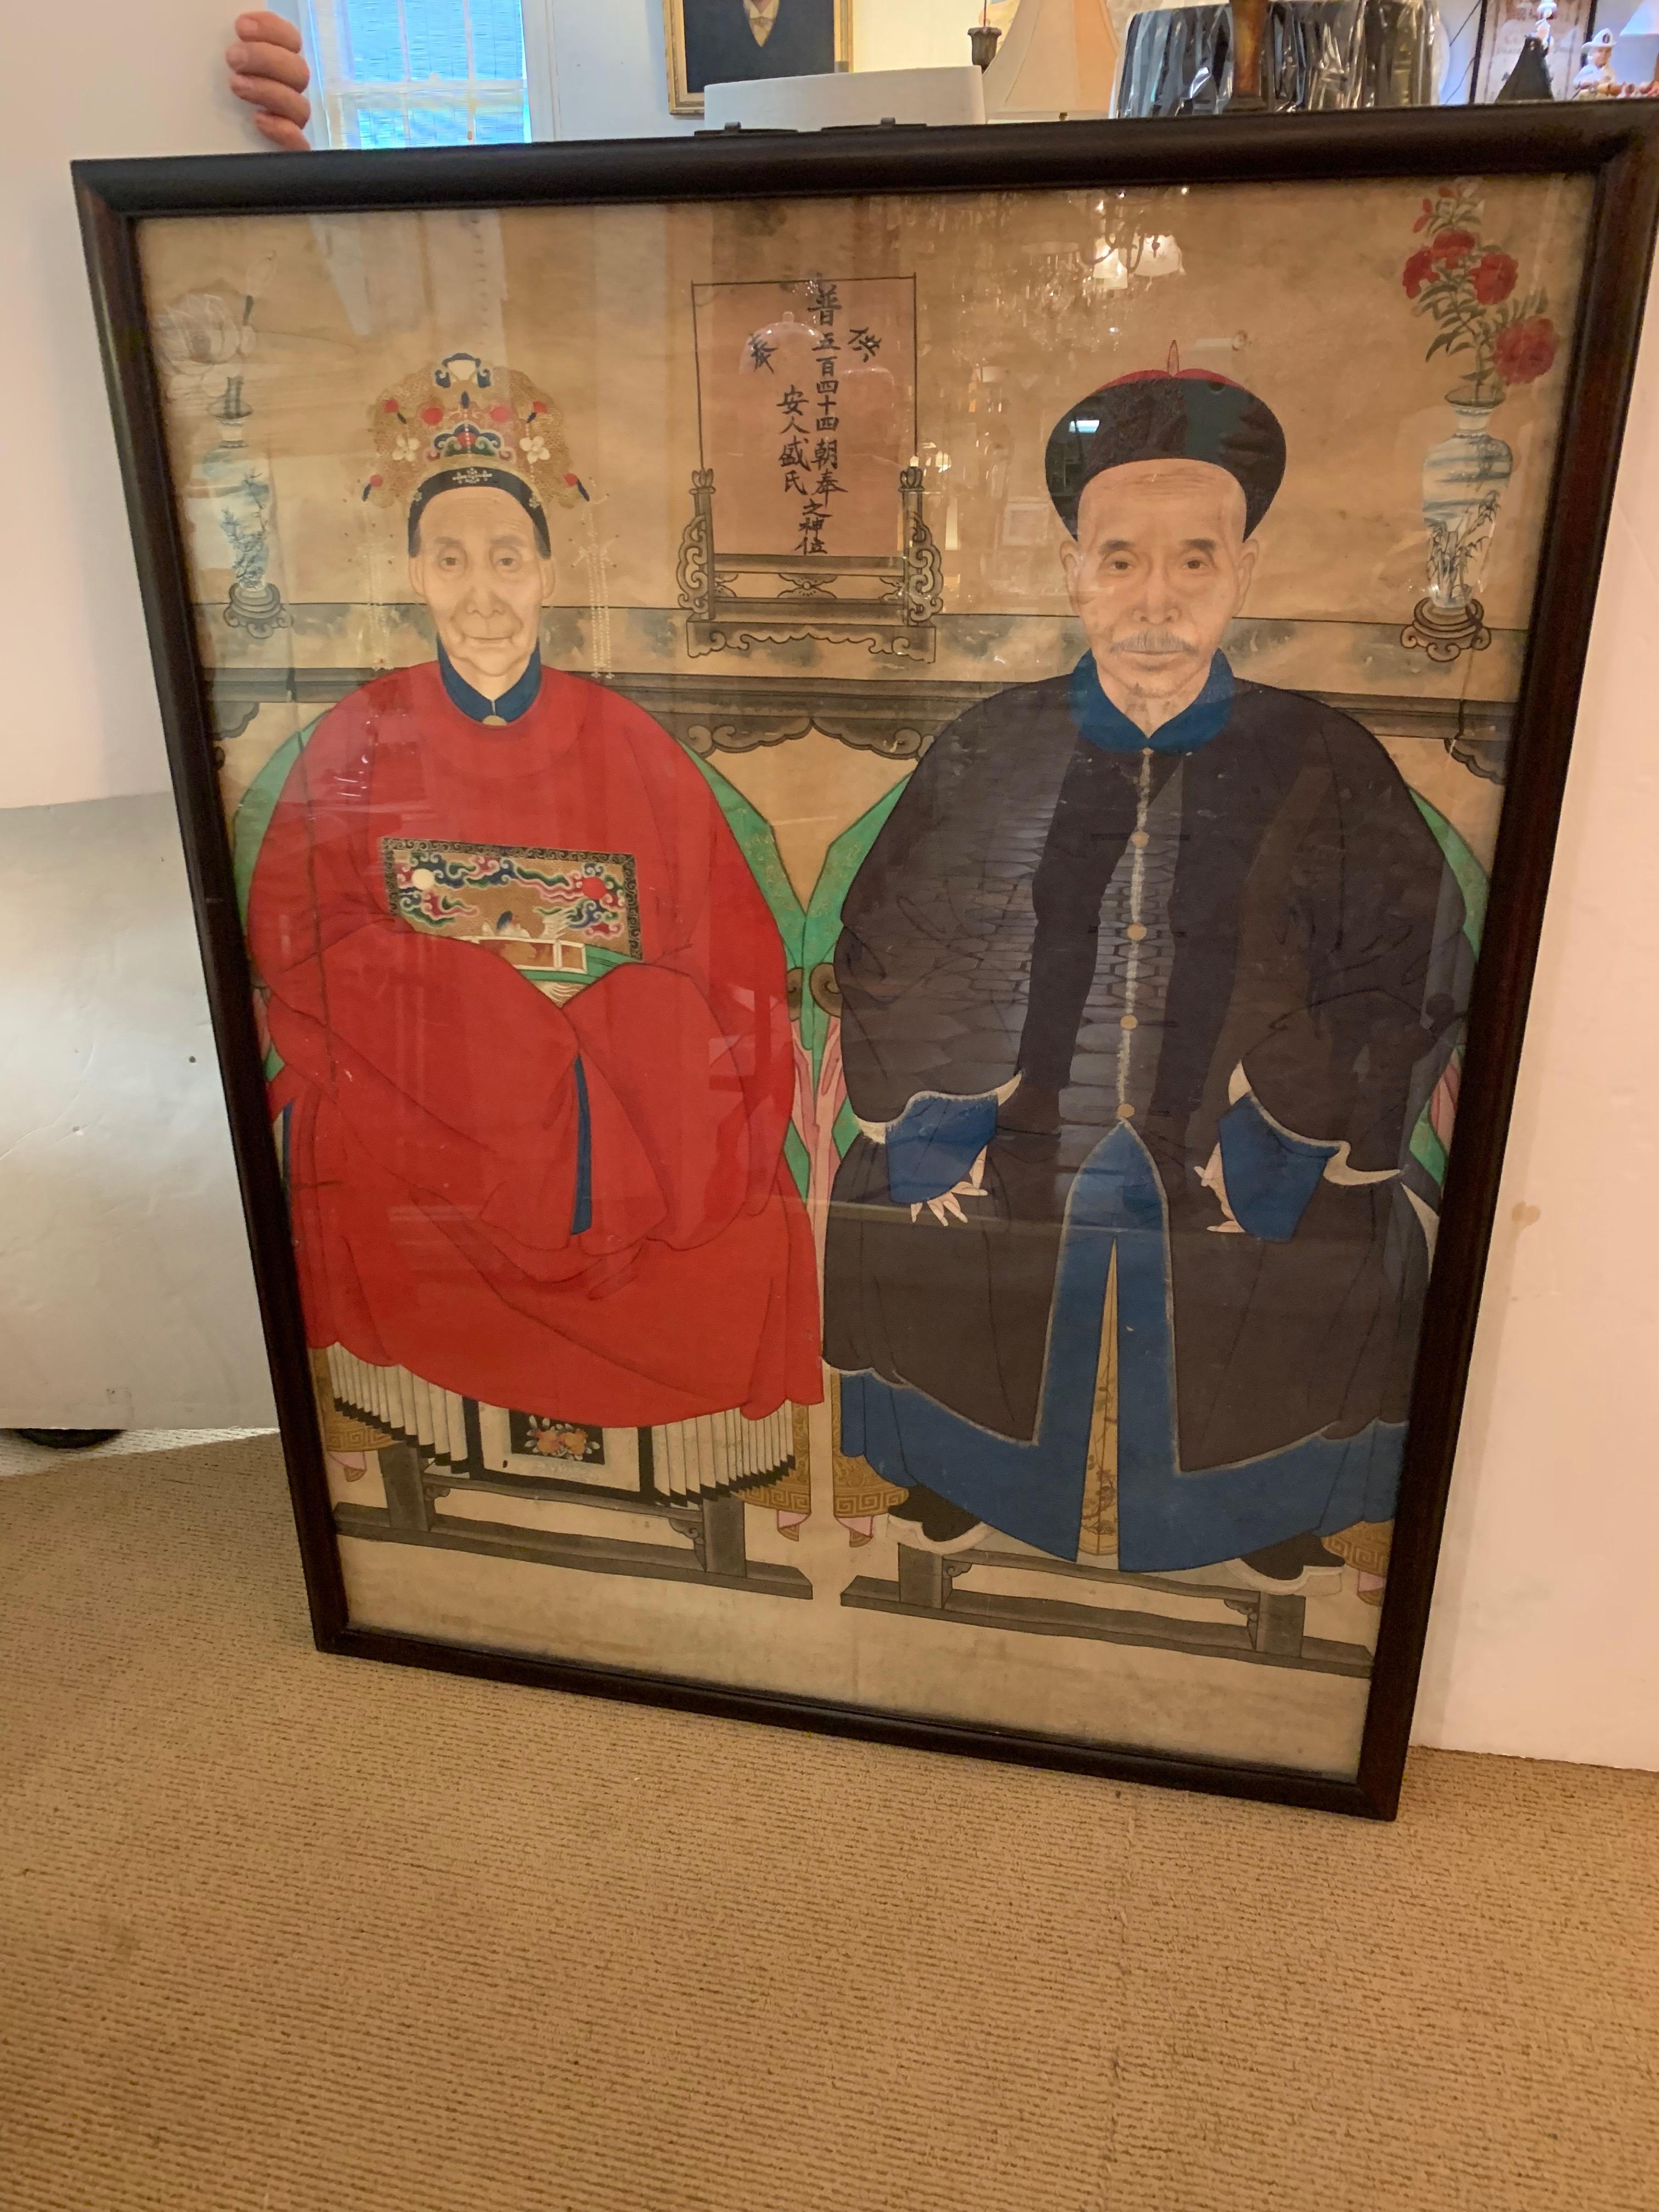 Very large and meticulously detailed Chinese ancestral portrait of a royal man and woman in red and navy blue robes against a neutral off white background. Wonderful Chinese lettering, a blue and white vase, and long beautifully rendered fingernails